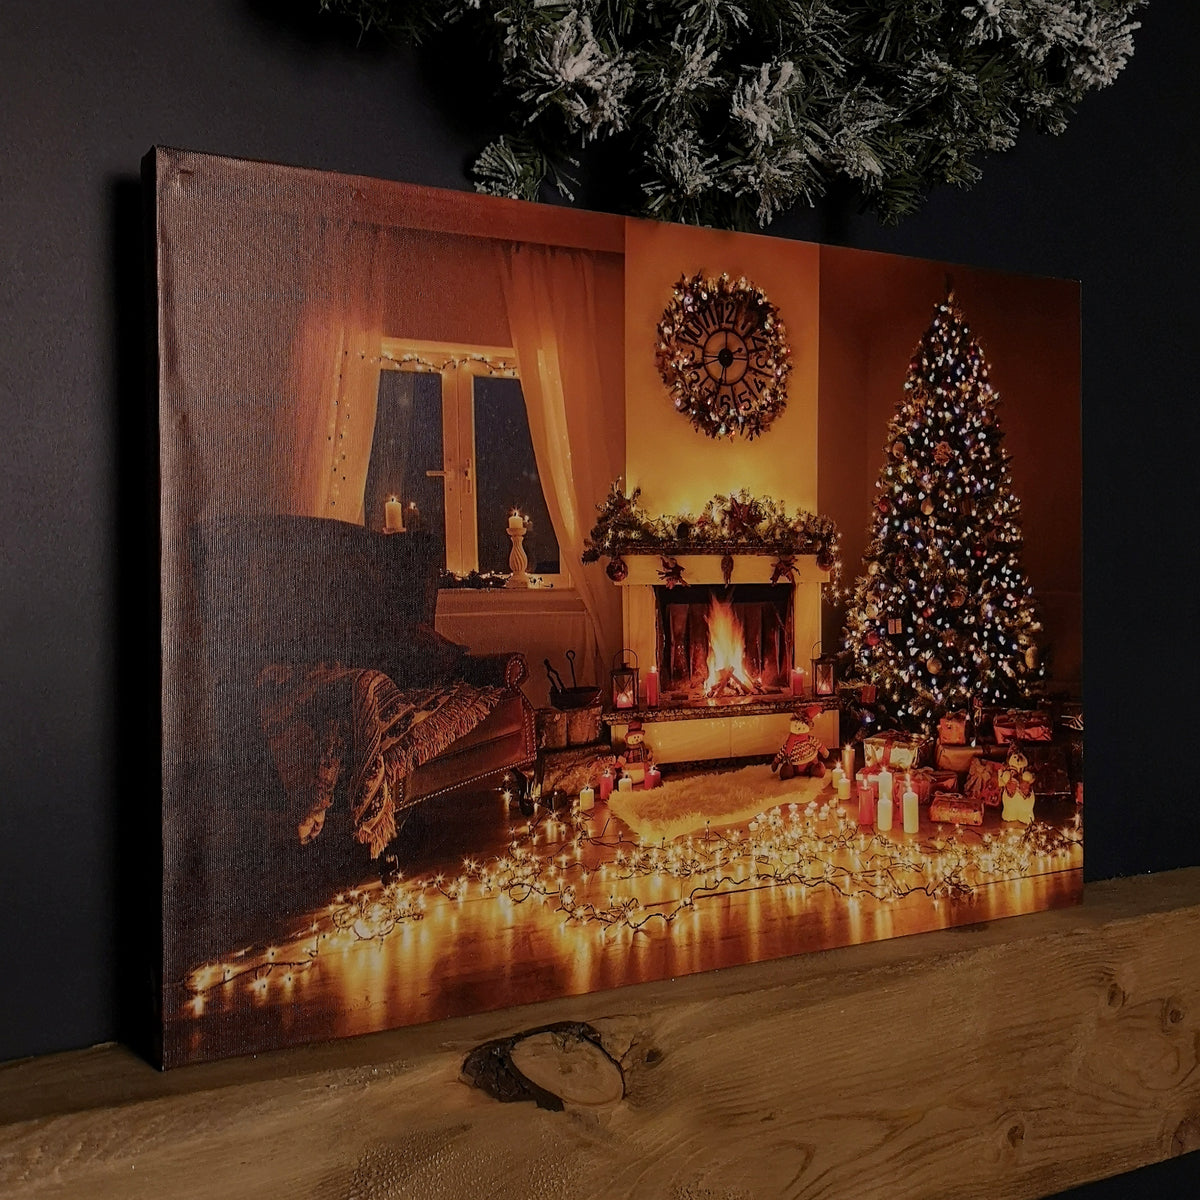 40 x 60cm Fibre Optic Wall Canvas with Christmas Tree Scene and Multicoloured LEDs